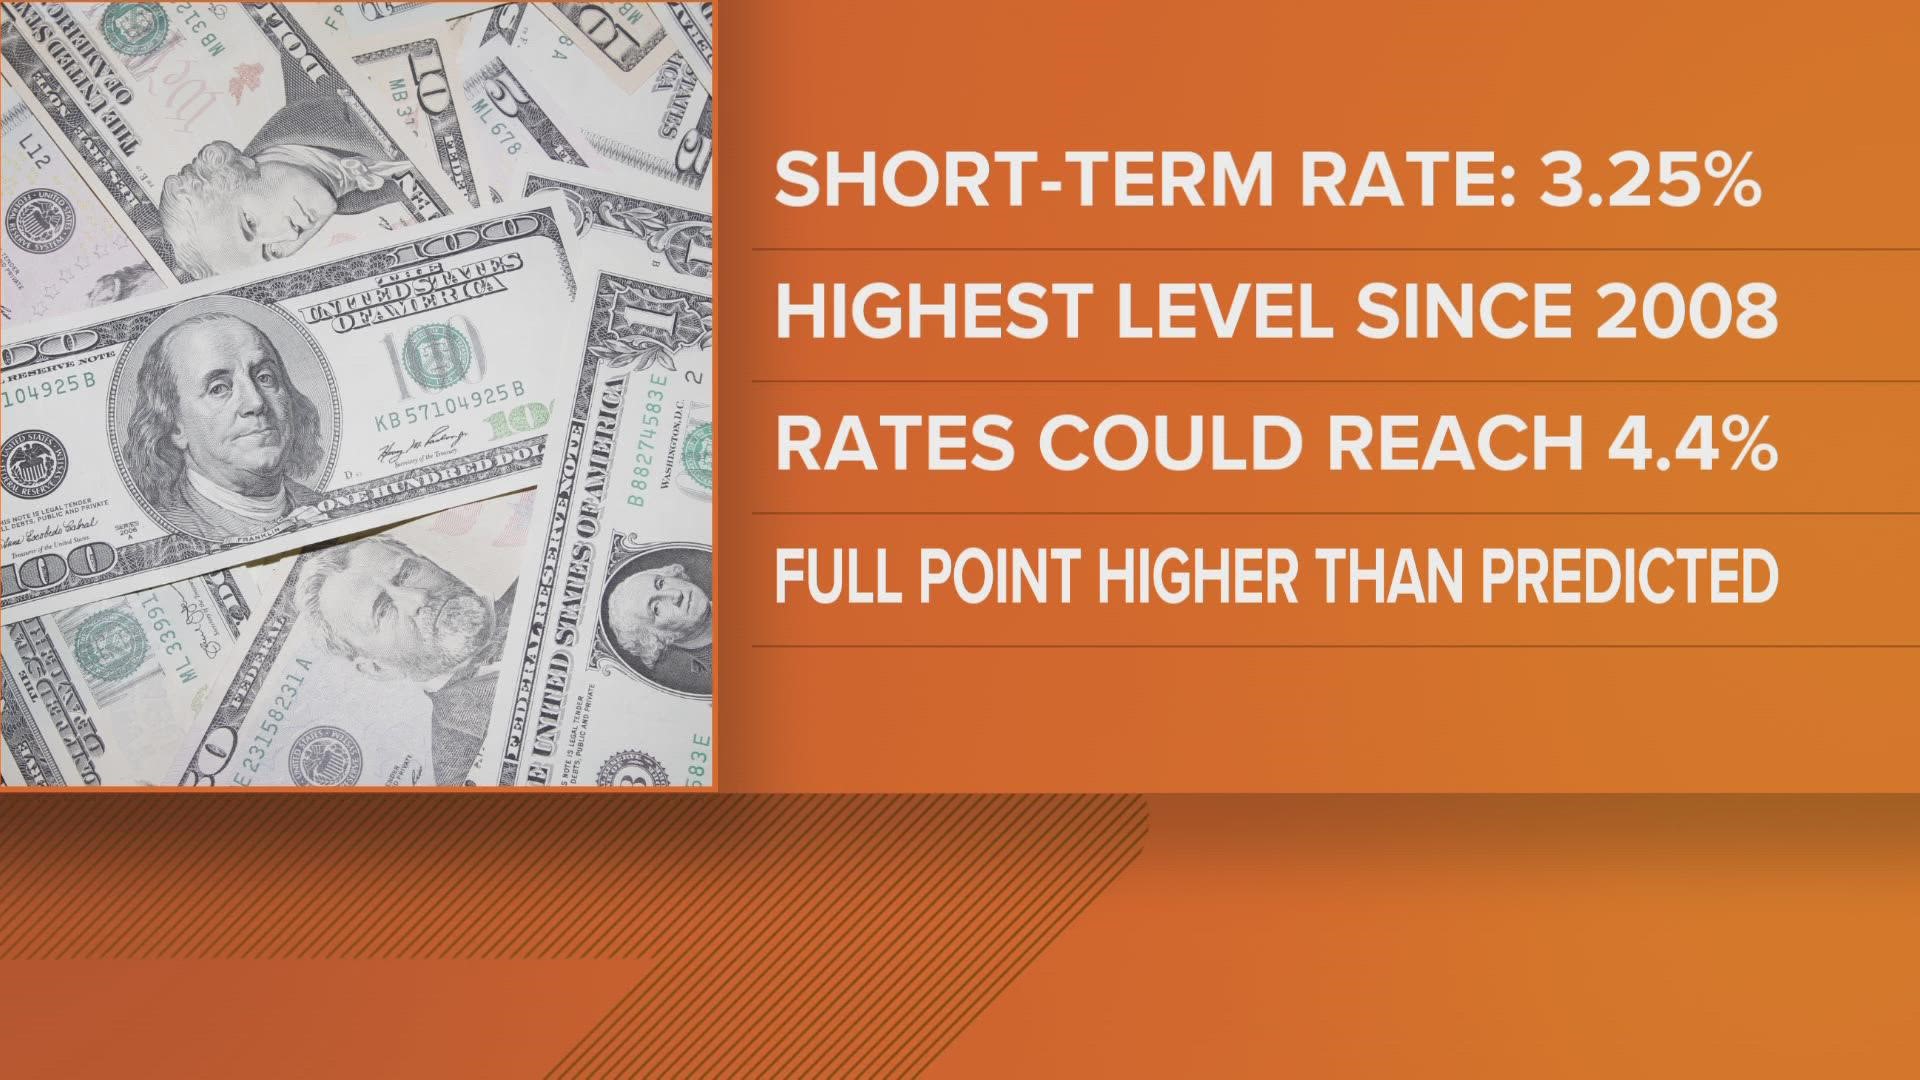 Economists increasingly say they think the Fed’s steep rate hikes will lead, over time, to job cuts, rising unemployment and a full-blown recession.